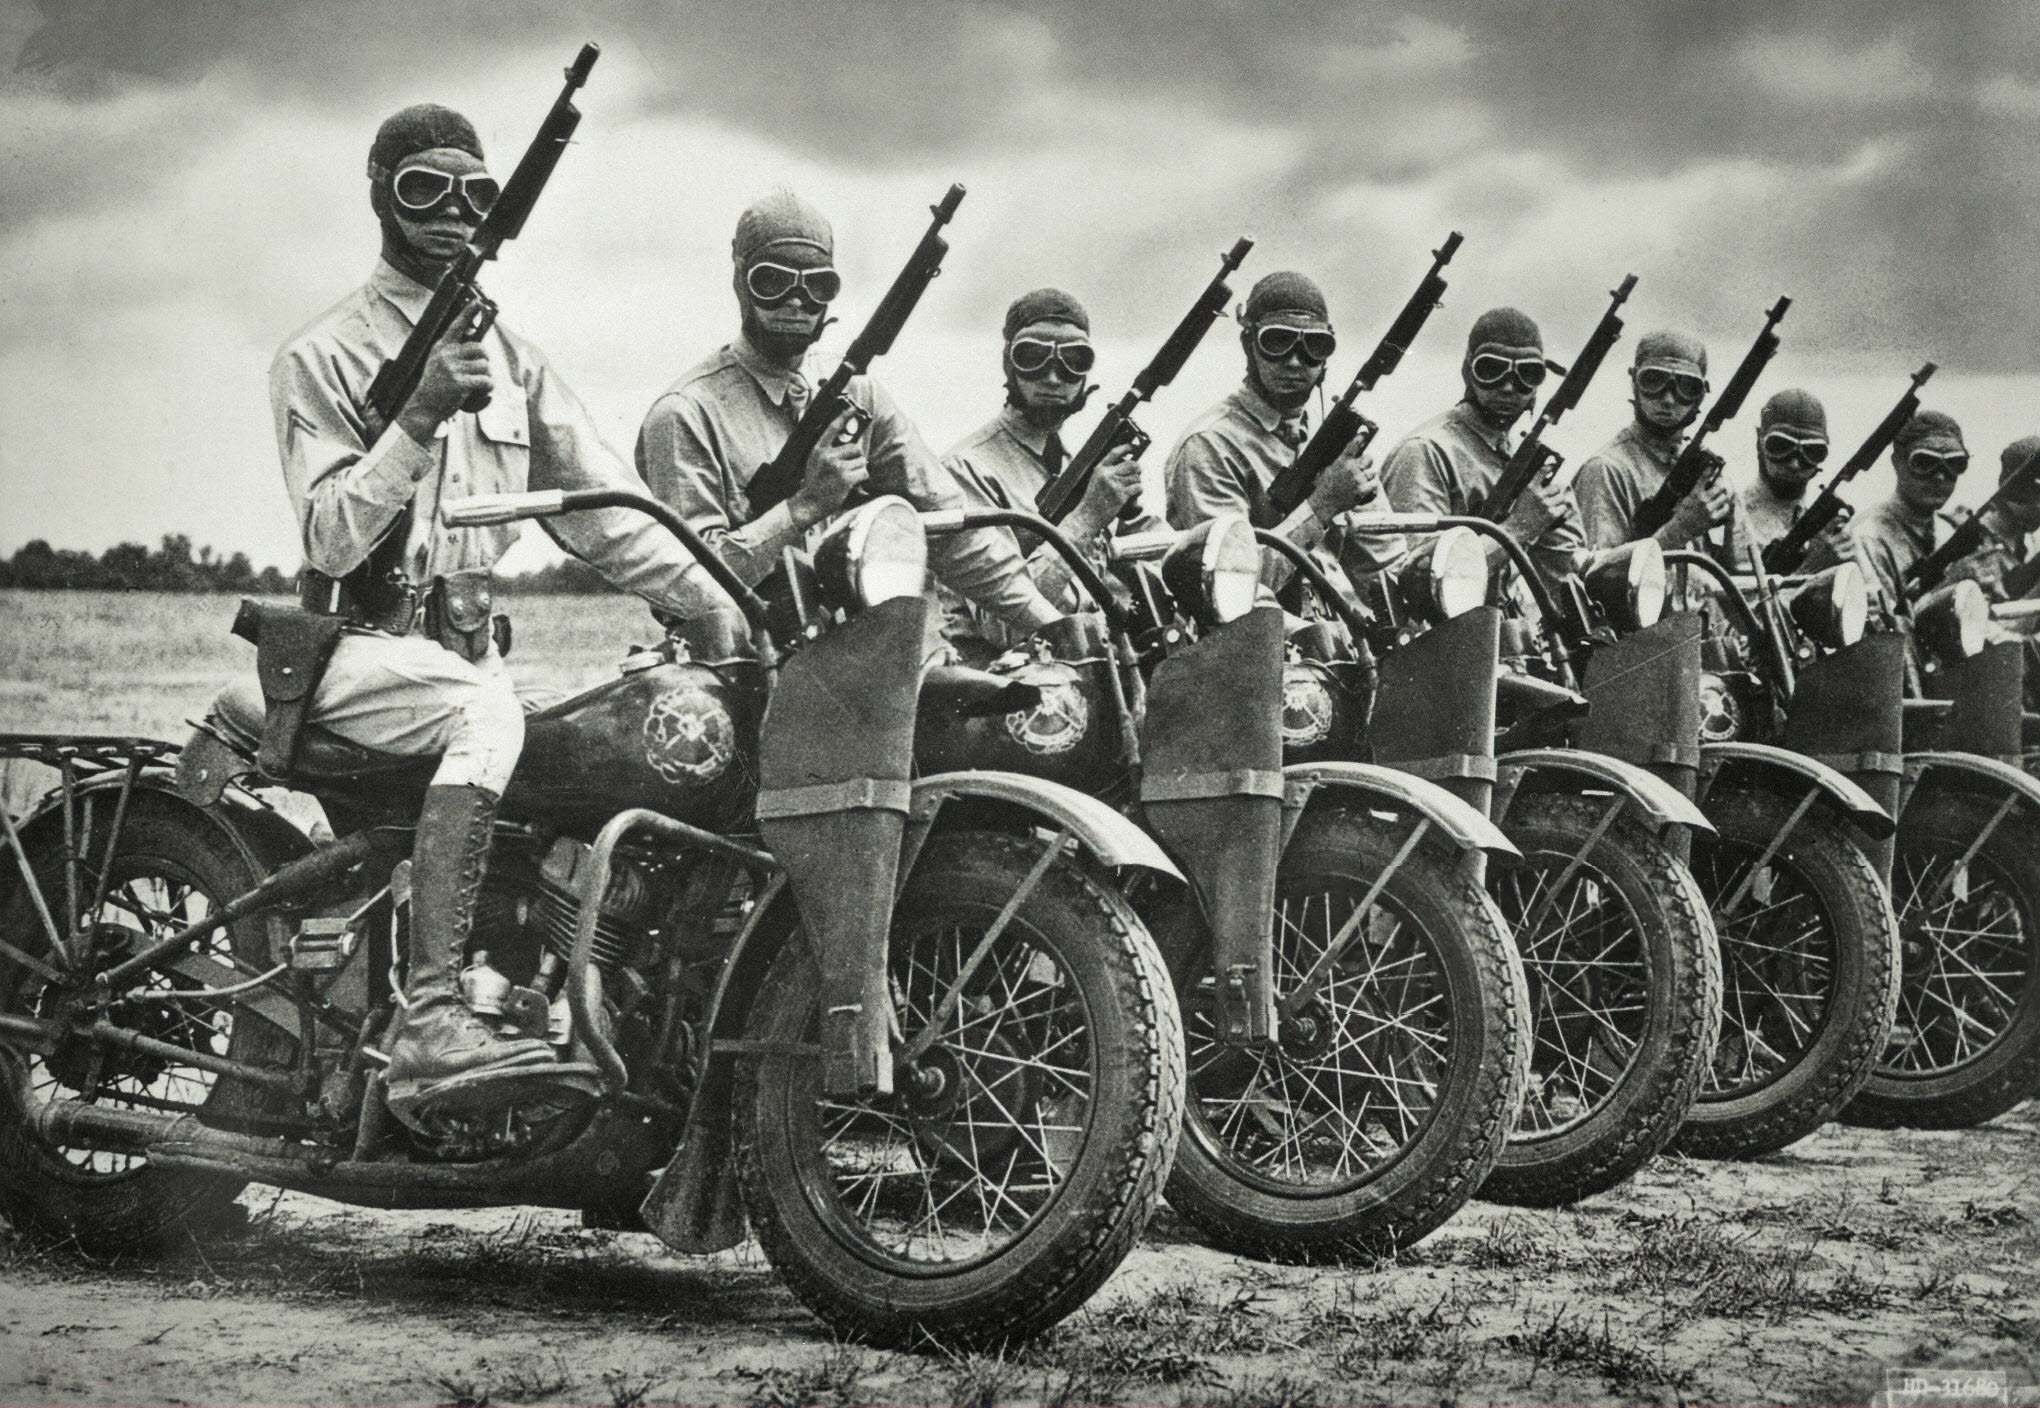 Row of mounted soldiers on Harley Davidson motorcycles (U.S. Army Armored Division contingency) World War II, 1942.jpg